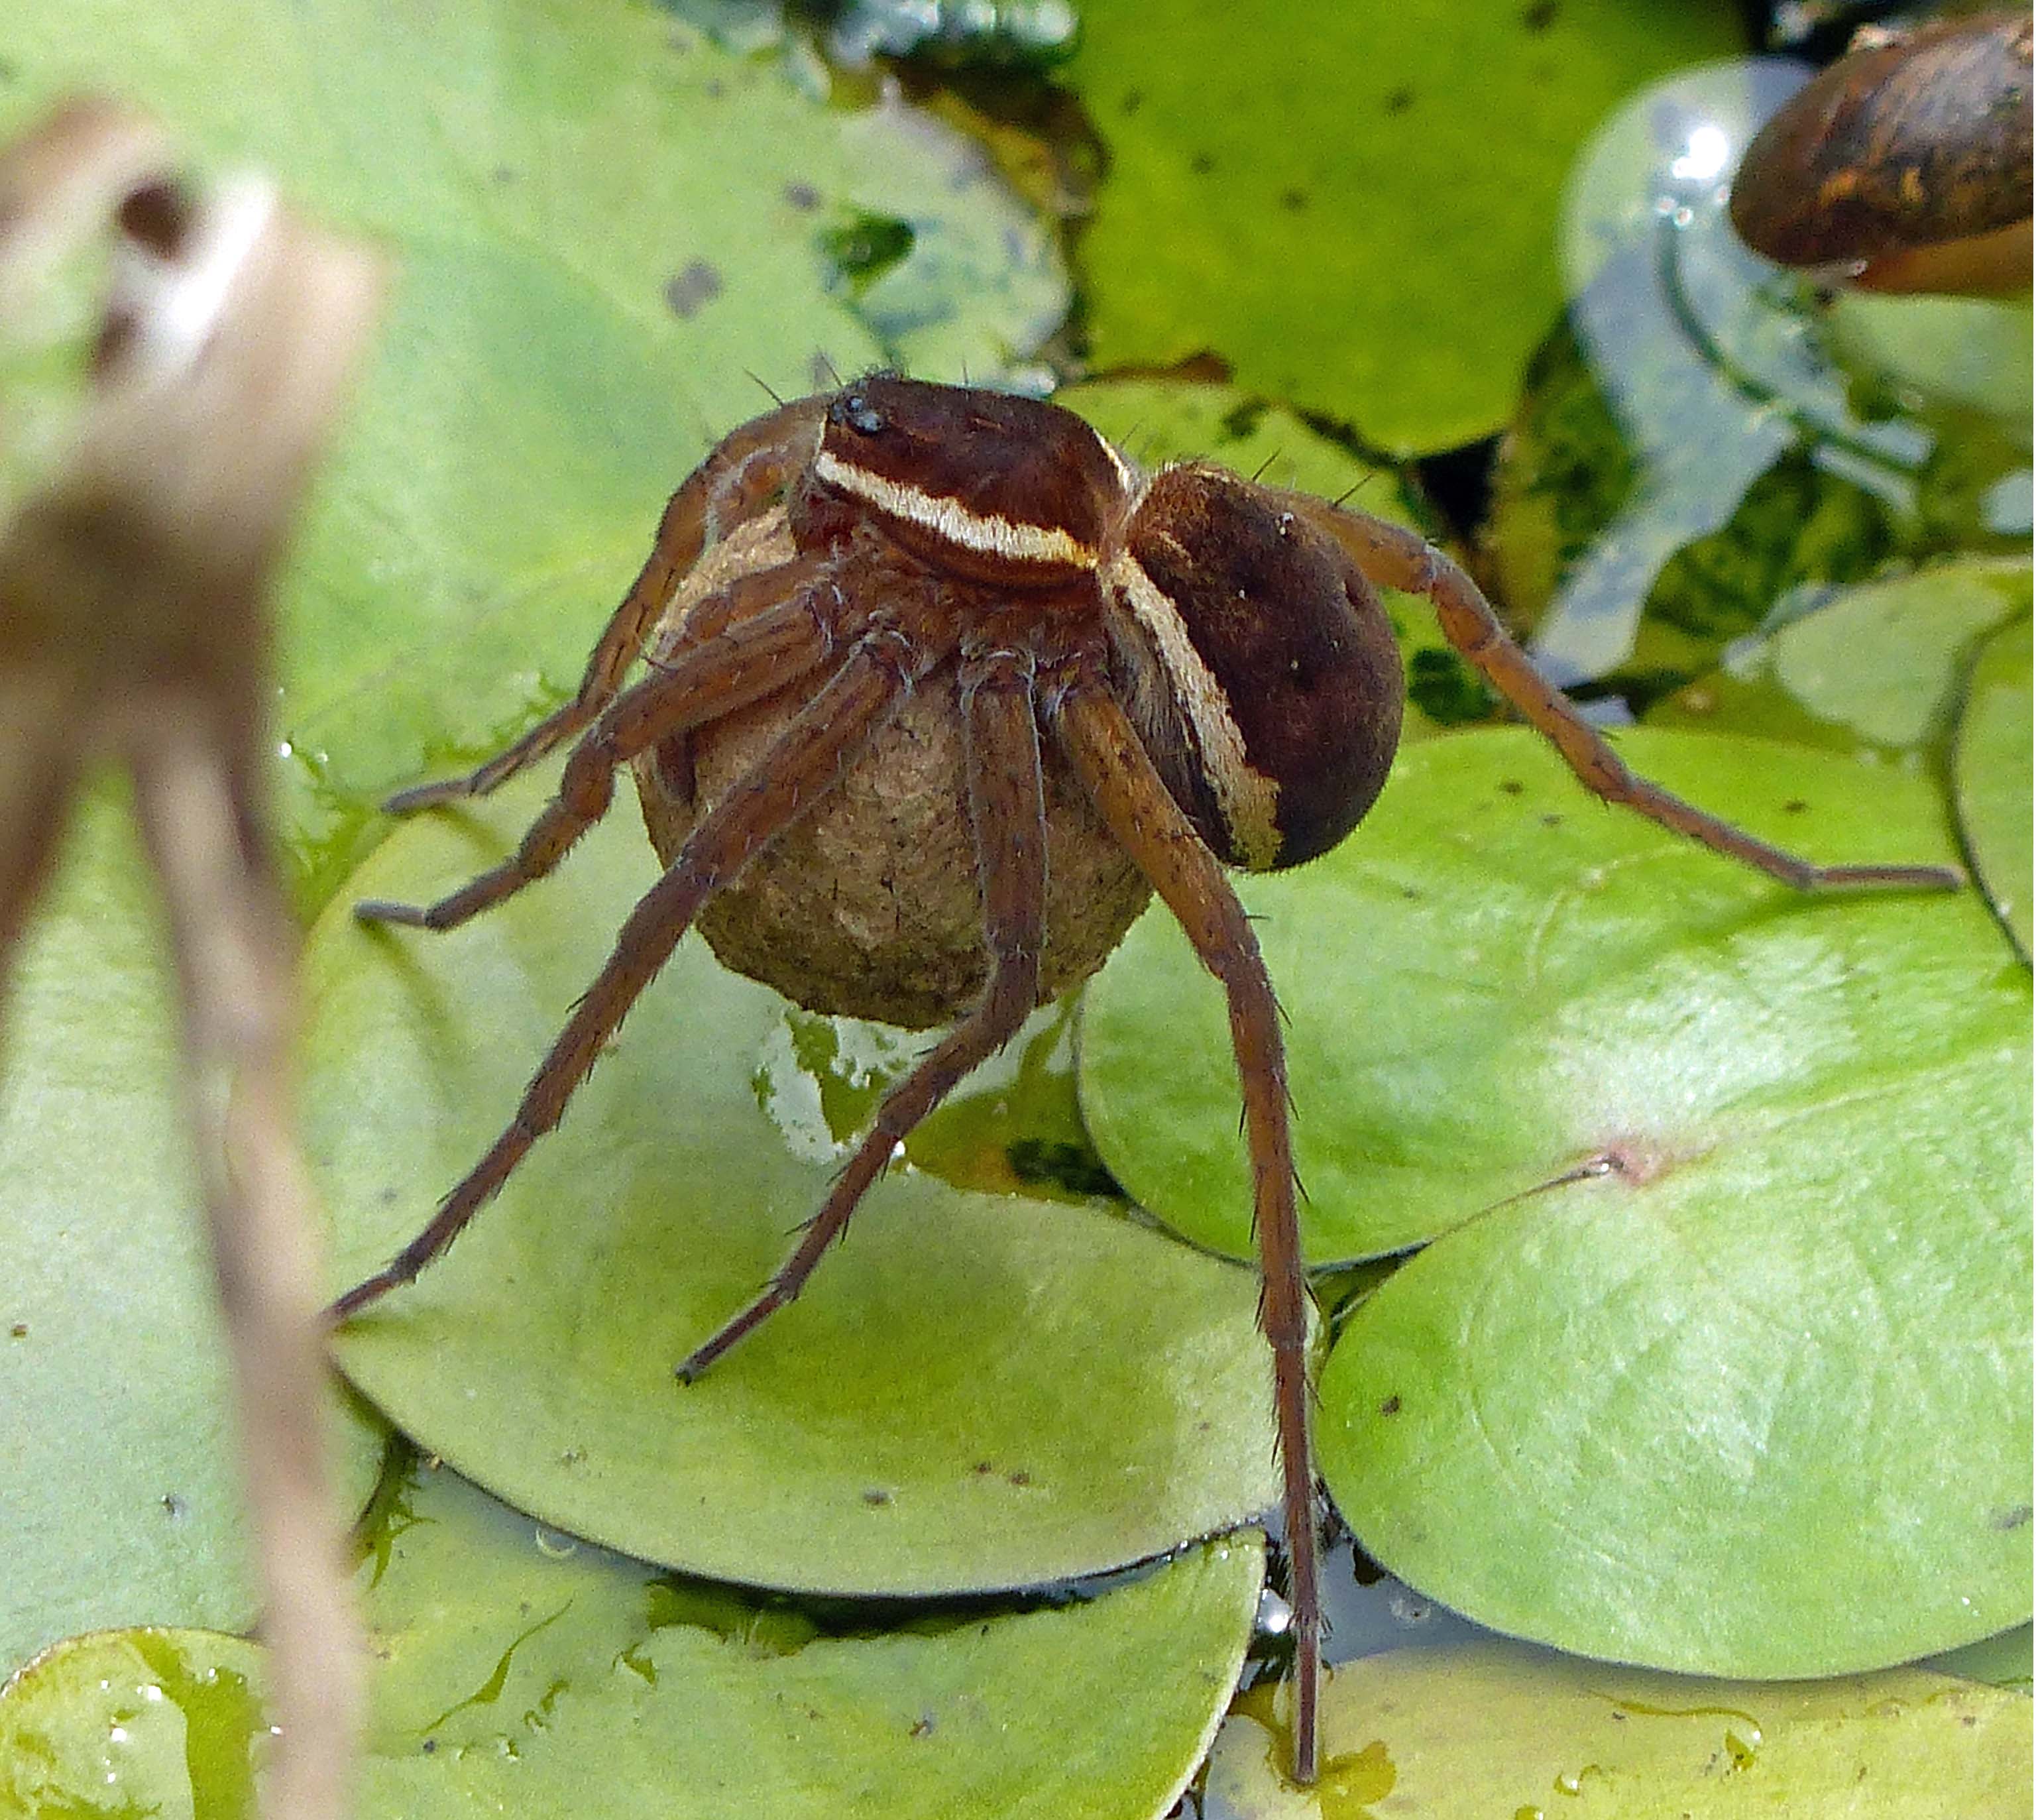 Dolomedes plantarius mothers carry their egg sacs under their bodies, held in their chelicerae